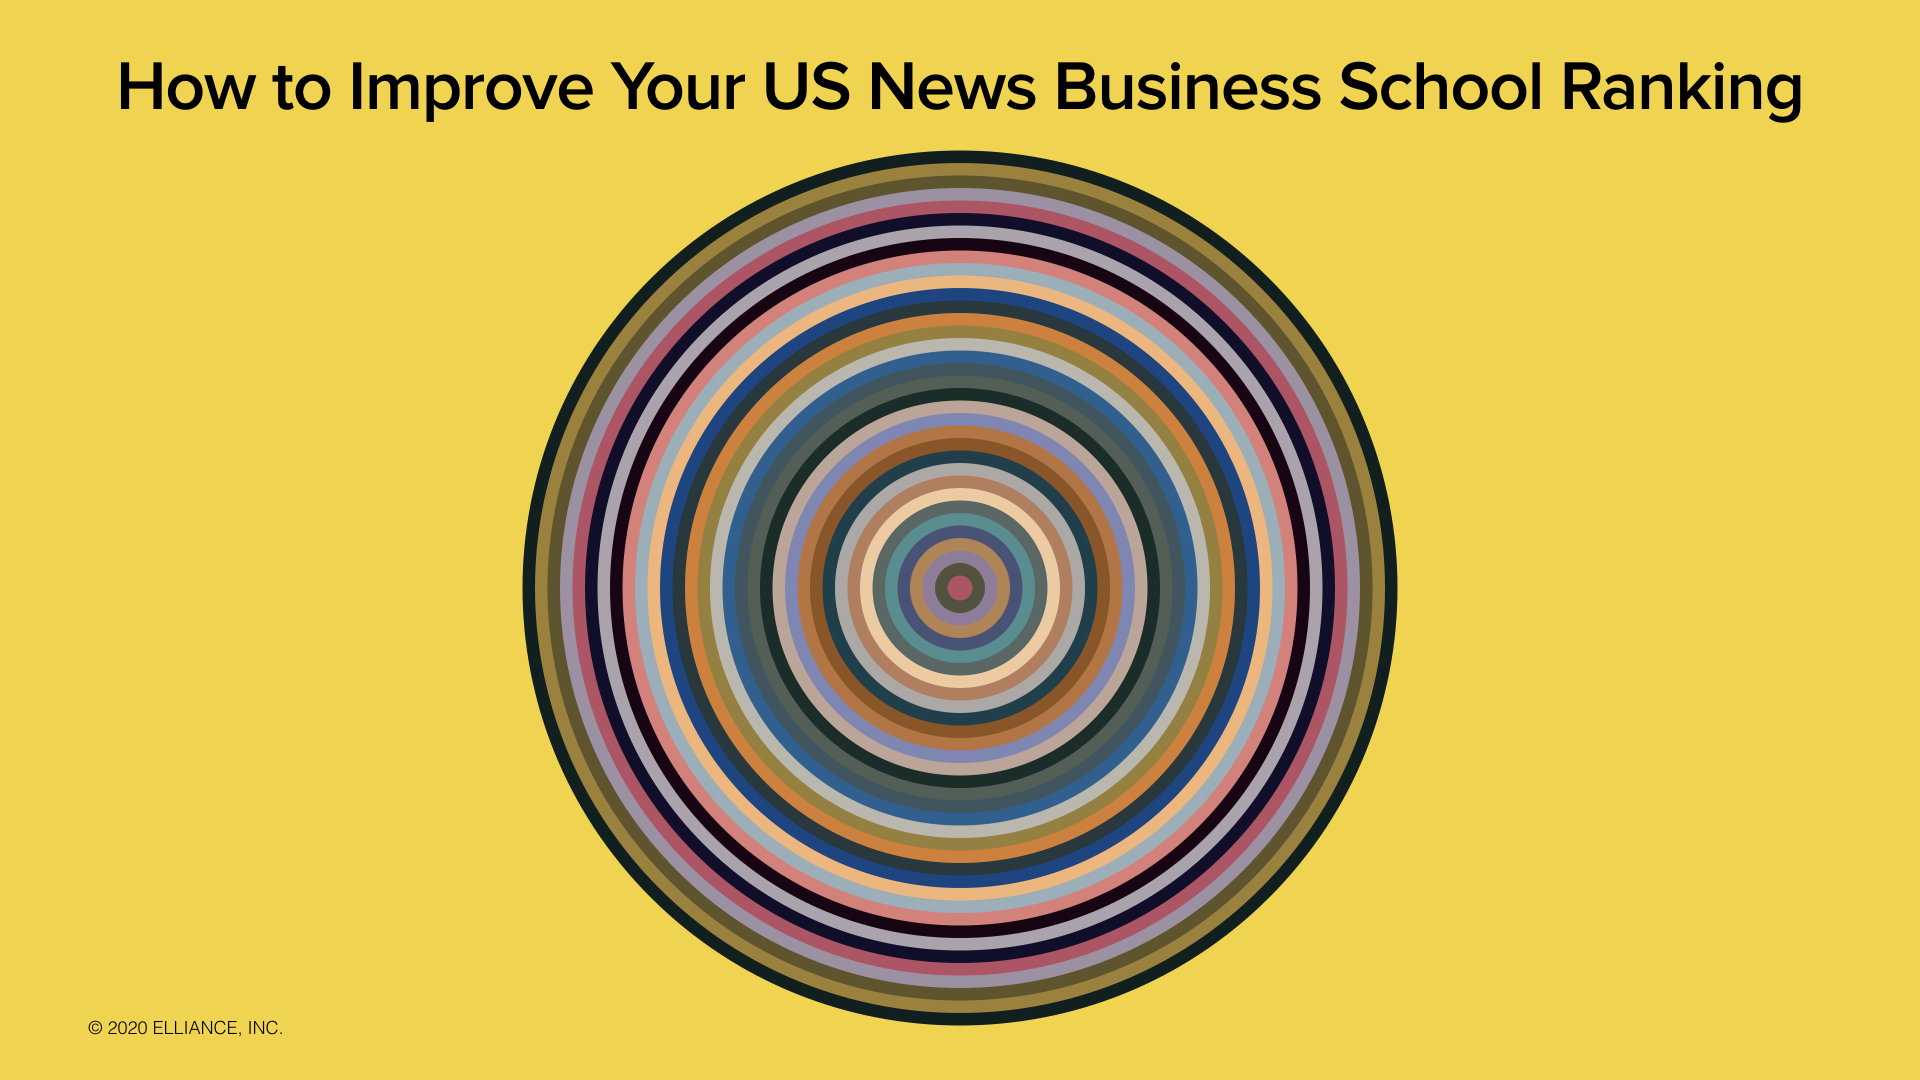 How To Improve Your US News Business School Rankings